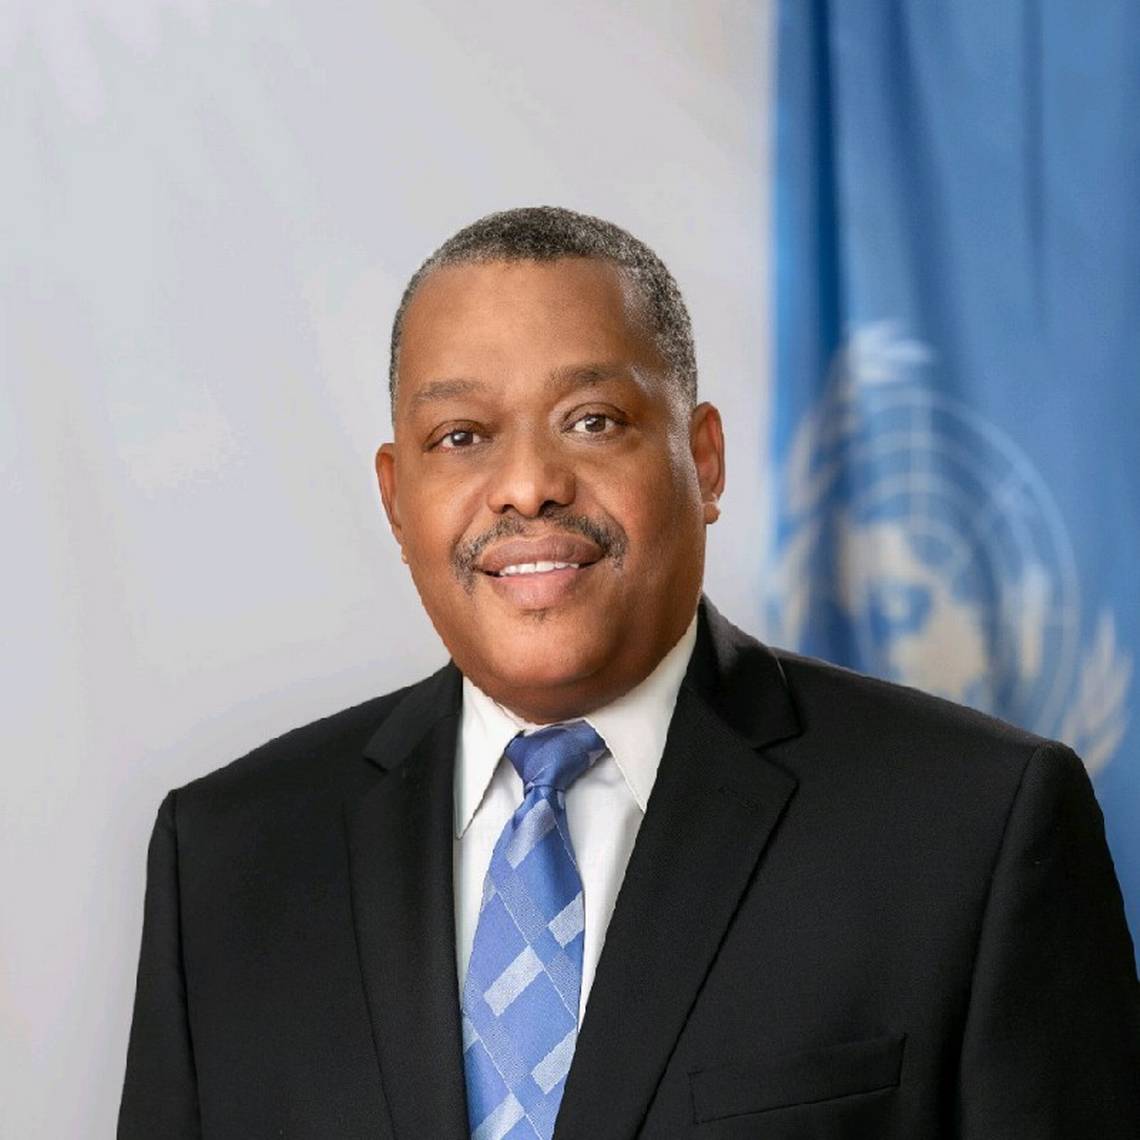 UN development specialist Garry Conille arrives to Haiti to take up the post of prime minister